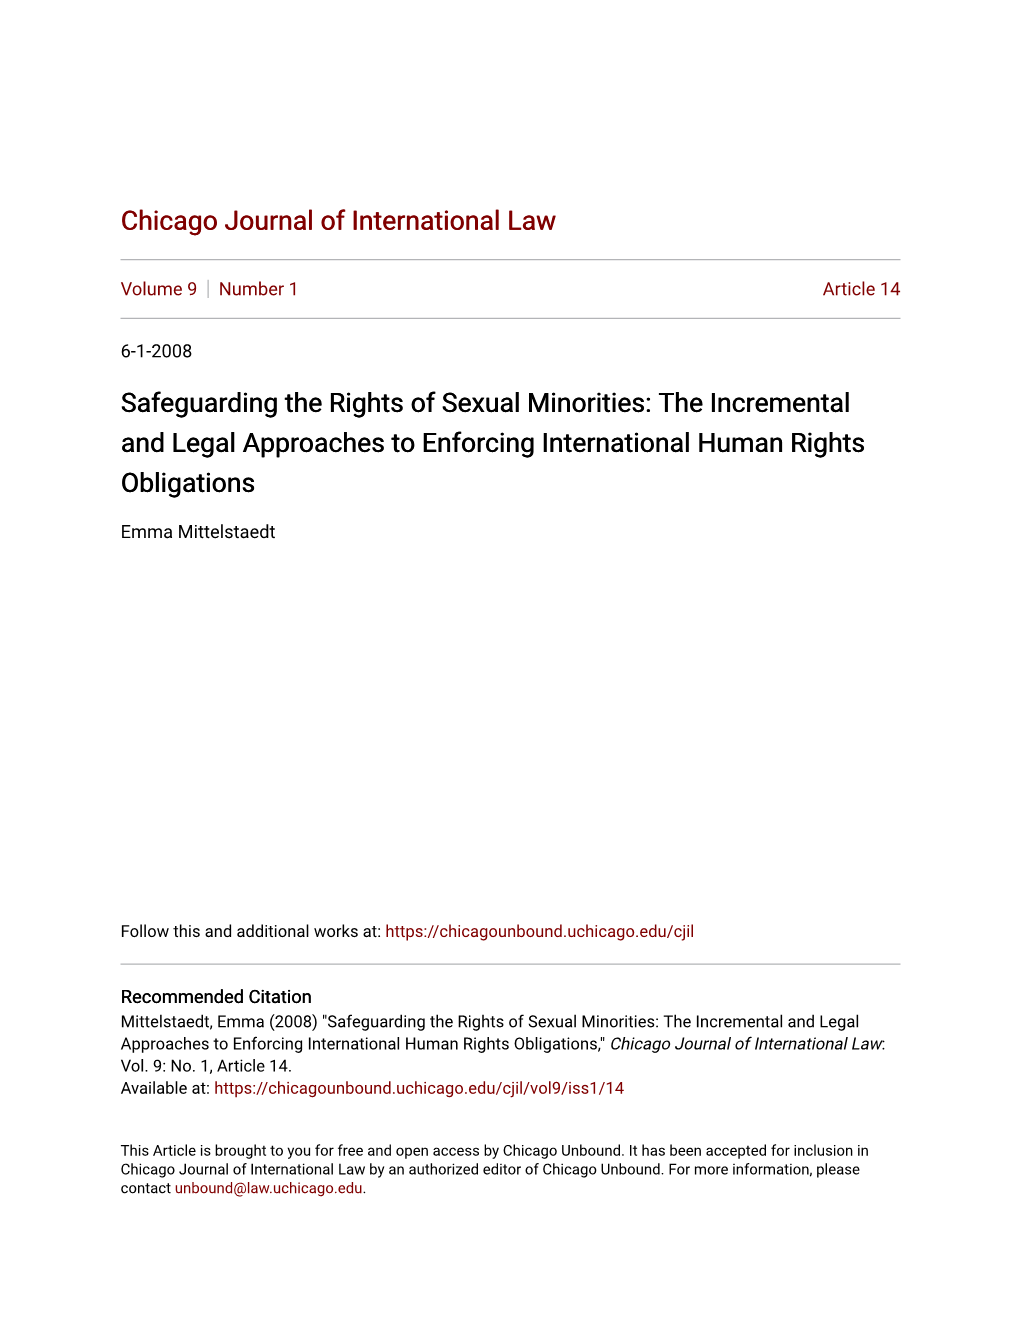 Safeguarding the Rights of Sexual Minorities: the Incremental and Legal Approaches to Enforcing International Human Rights Obligations